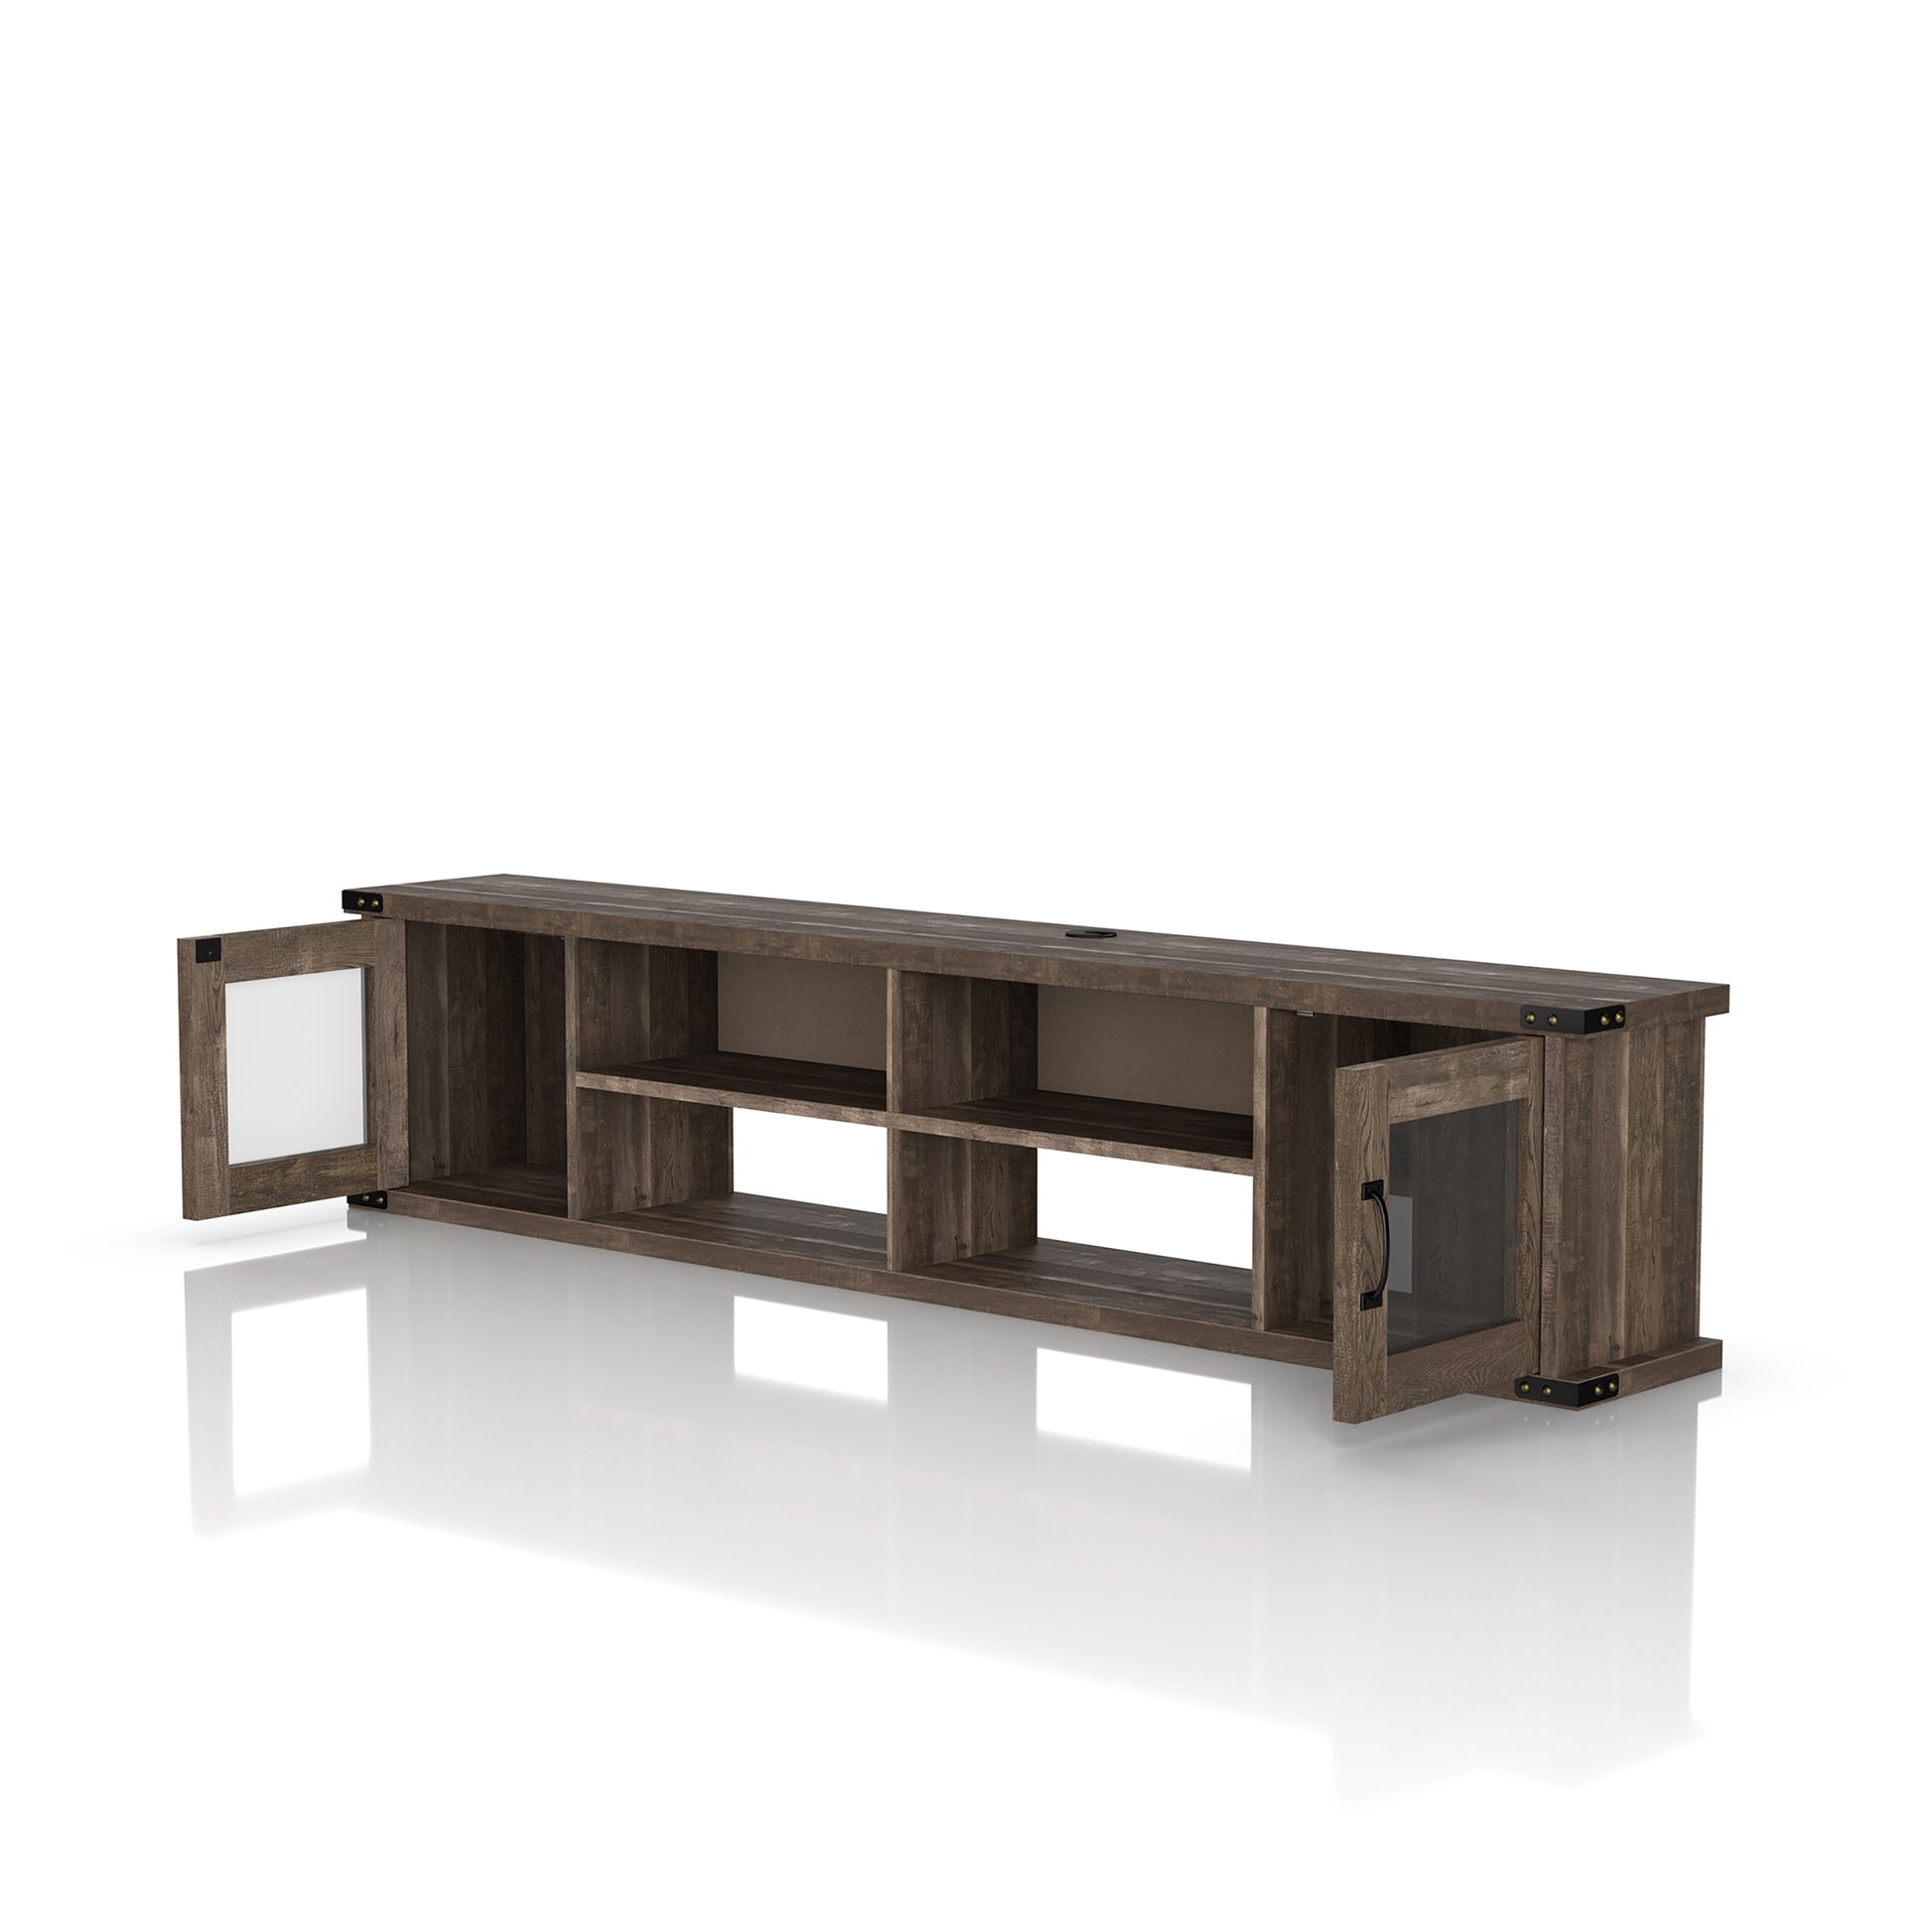 Left angled modern reclaimed oak four-shelf wall mountable TV stand with glass doors open on a white background